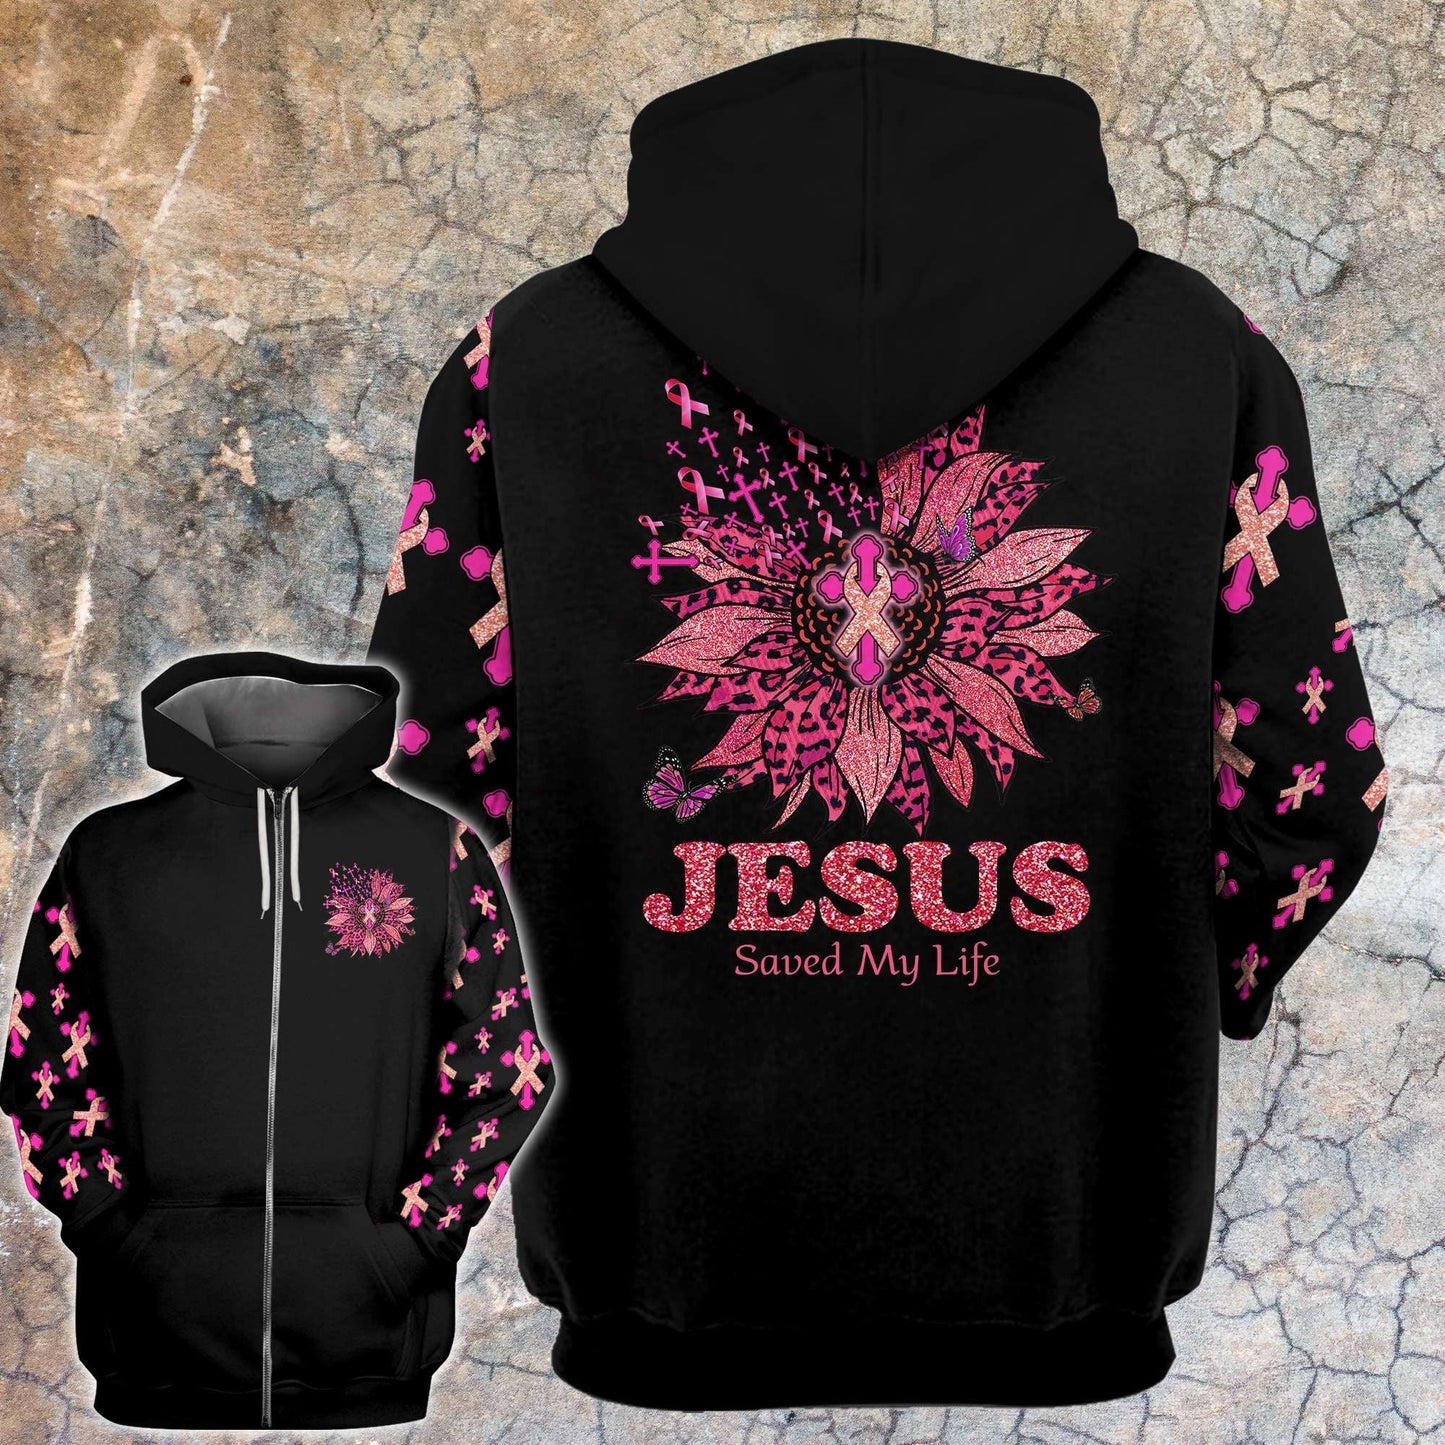 Leopard Sunflower Breast Cancer Faith - Breast Cancer Awareness All Over T-shirt and Hoodie 0822